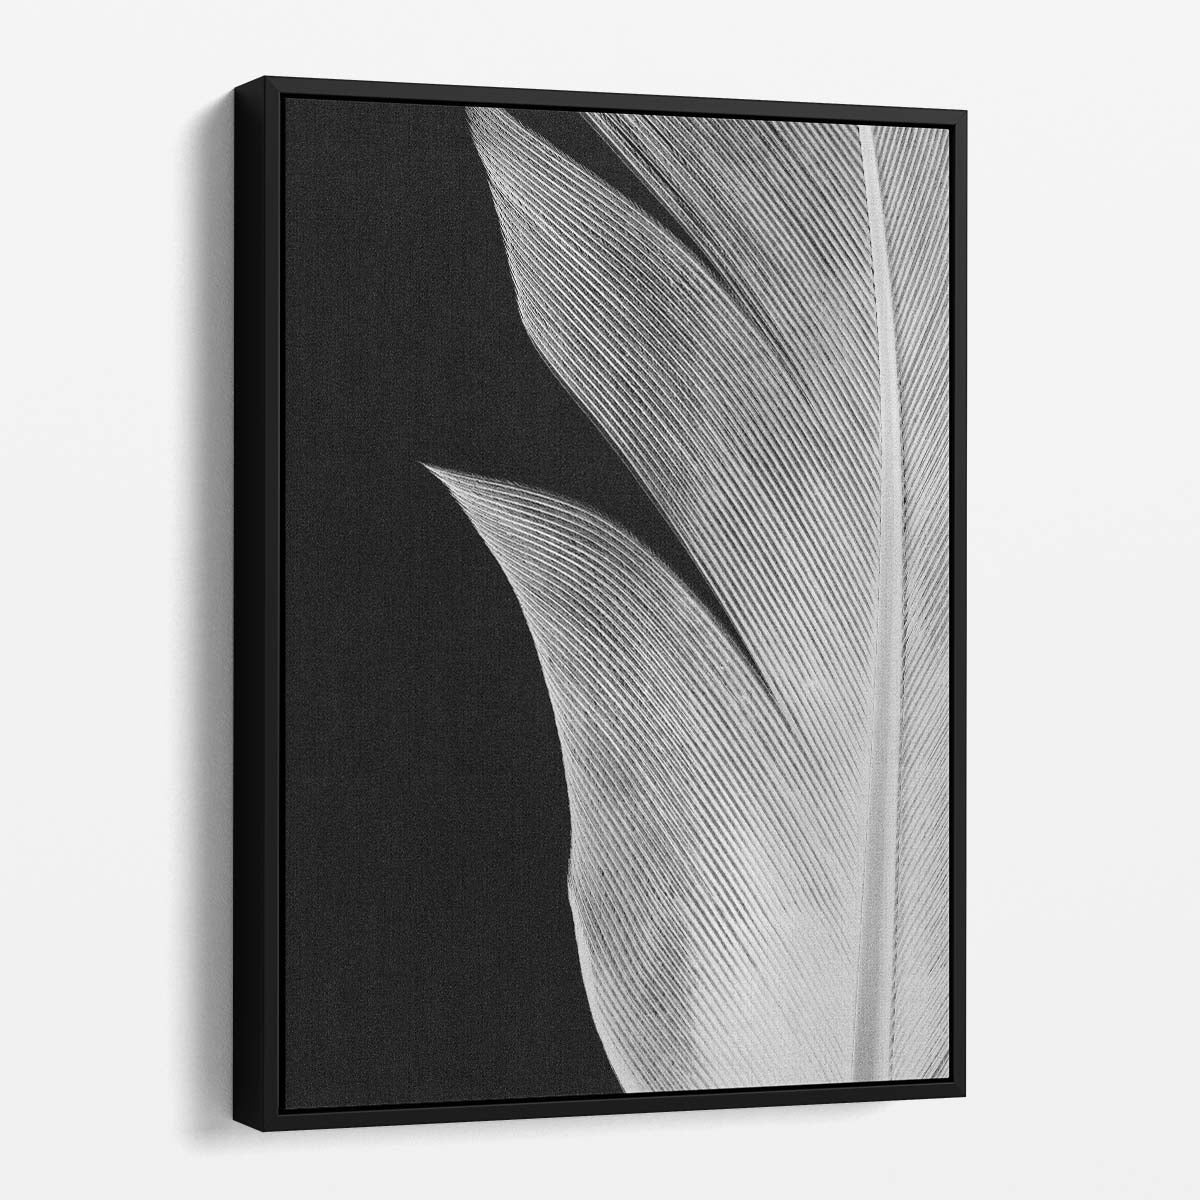 Monochrome Still Life Bird Feather Photography on Black Background by Luxuriance Designs, made in USA